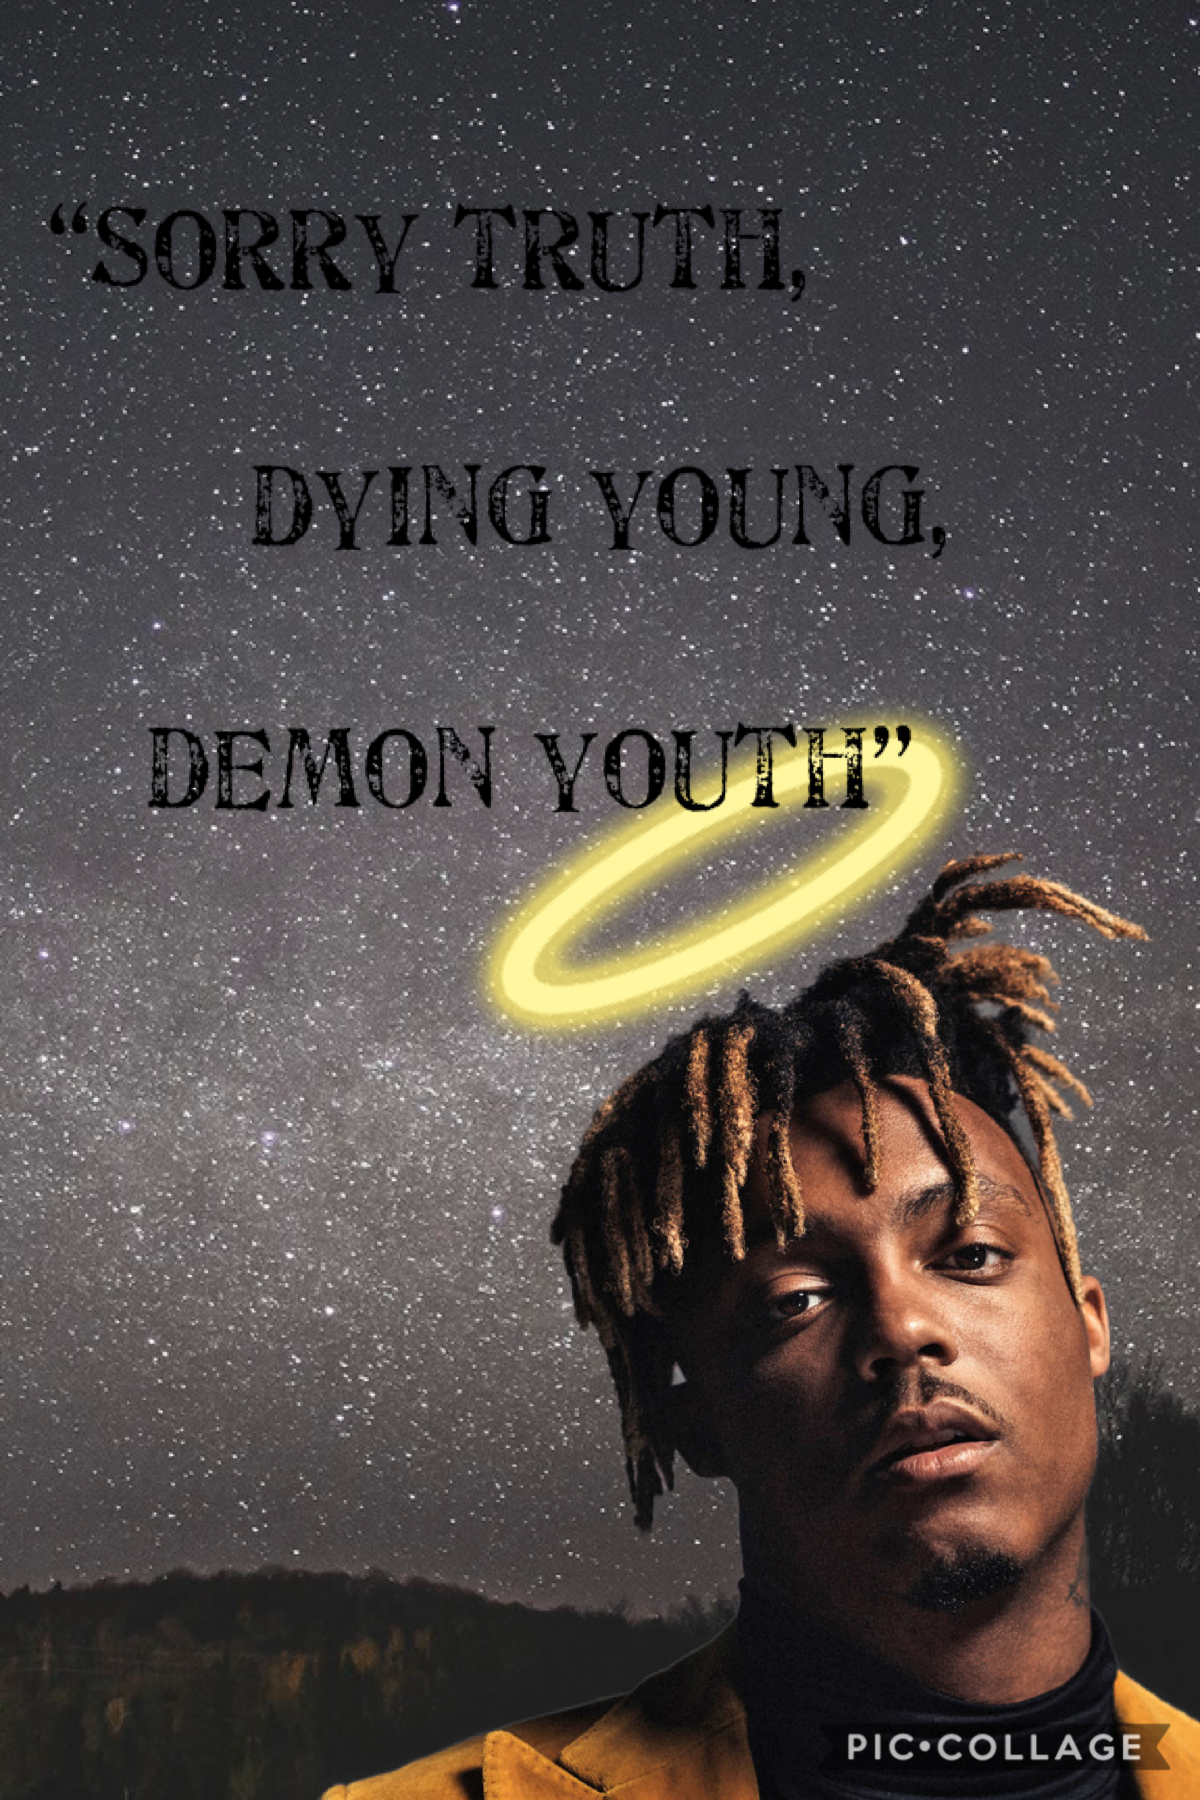 😔RIP😔
Juice Wrld was such a great artist. It’s sad that we have to loose another one so young. May he Rest In Peace. He will be missed.